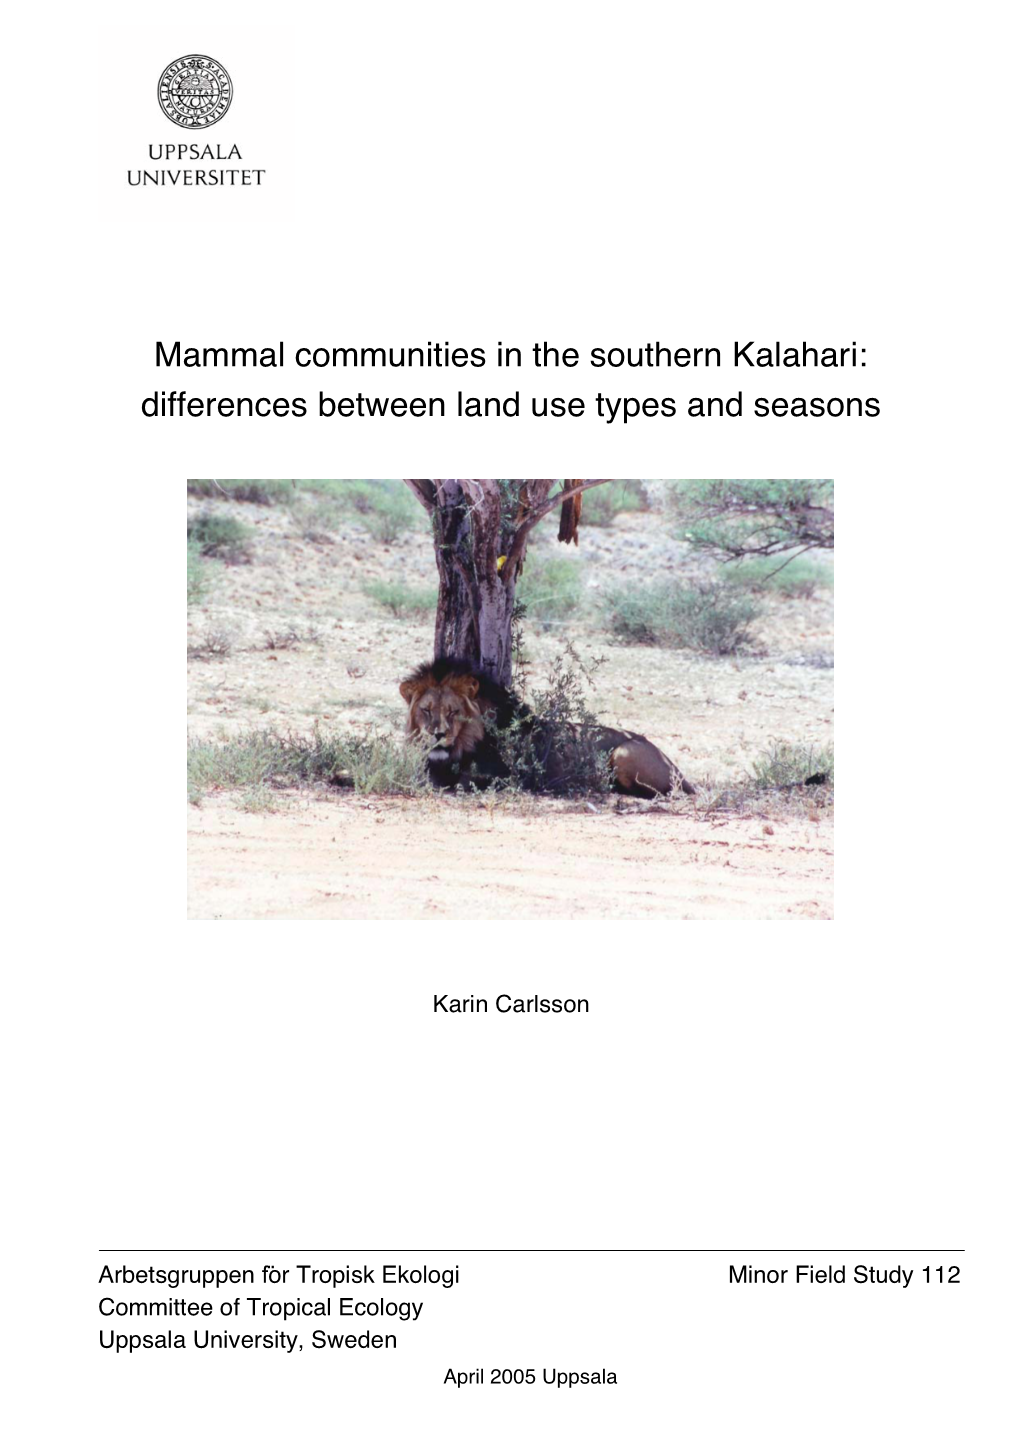 Mammal Communities in the Southern Kalahari: Differences Between Land Use Types and Seasons